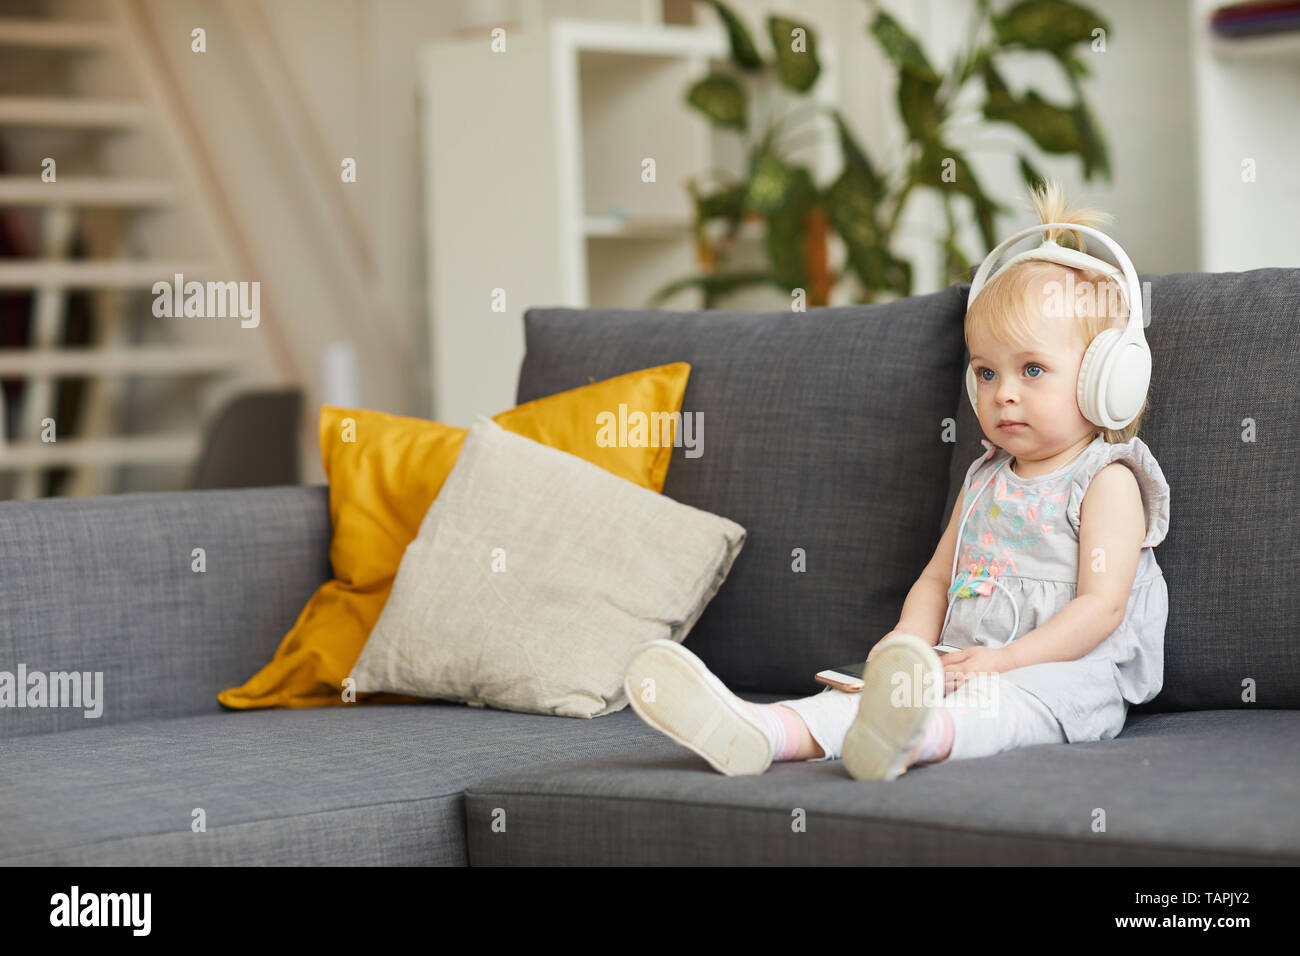 Serious curious little girl digital nomad in wired headphones sitting on comfortable sofa and listening to music via smartphone app Stock Photo